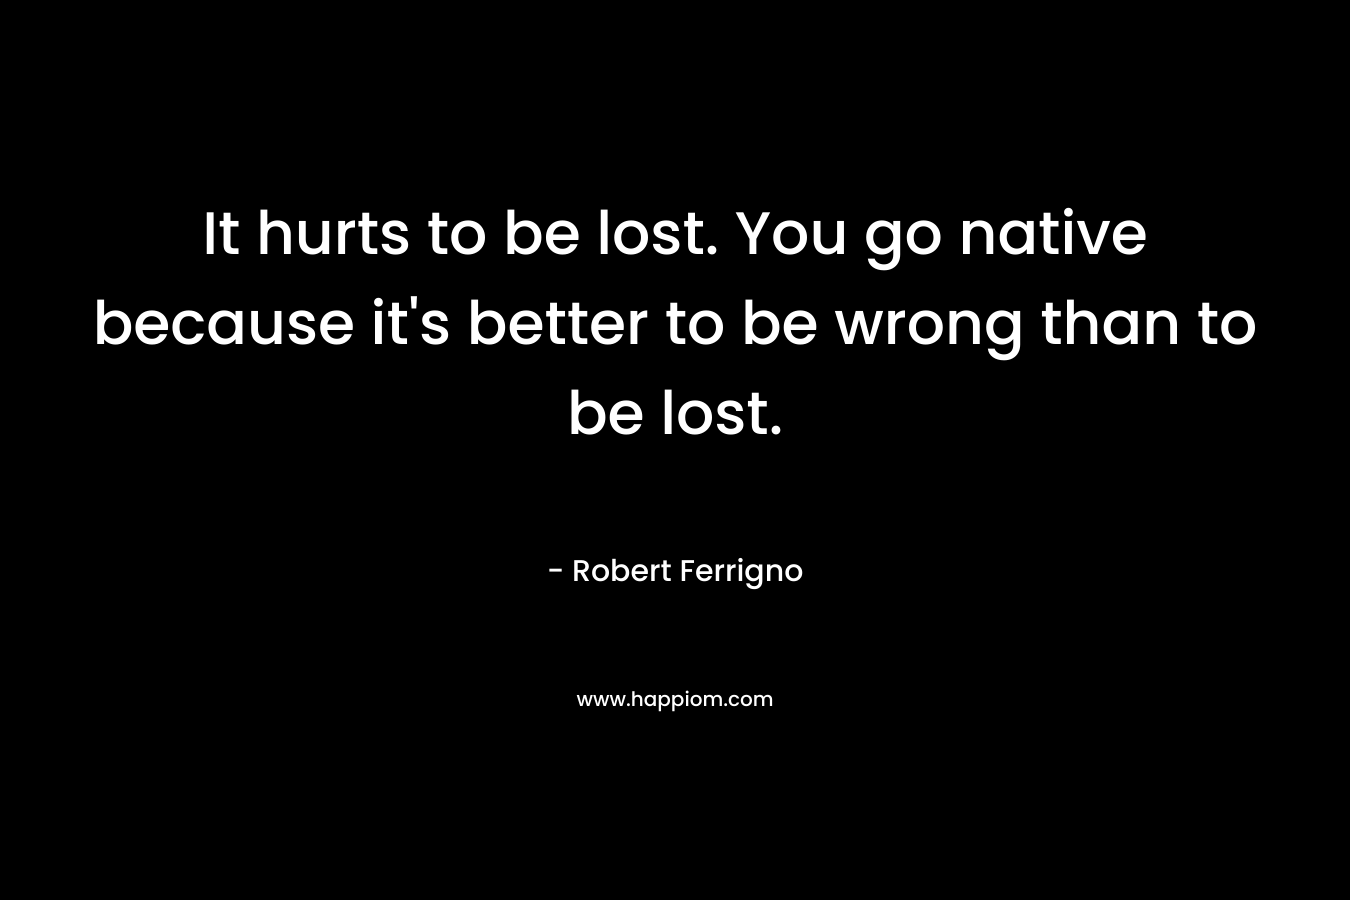 It hurts to be lost. You go native because it's better to be wrong than to be lost.